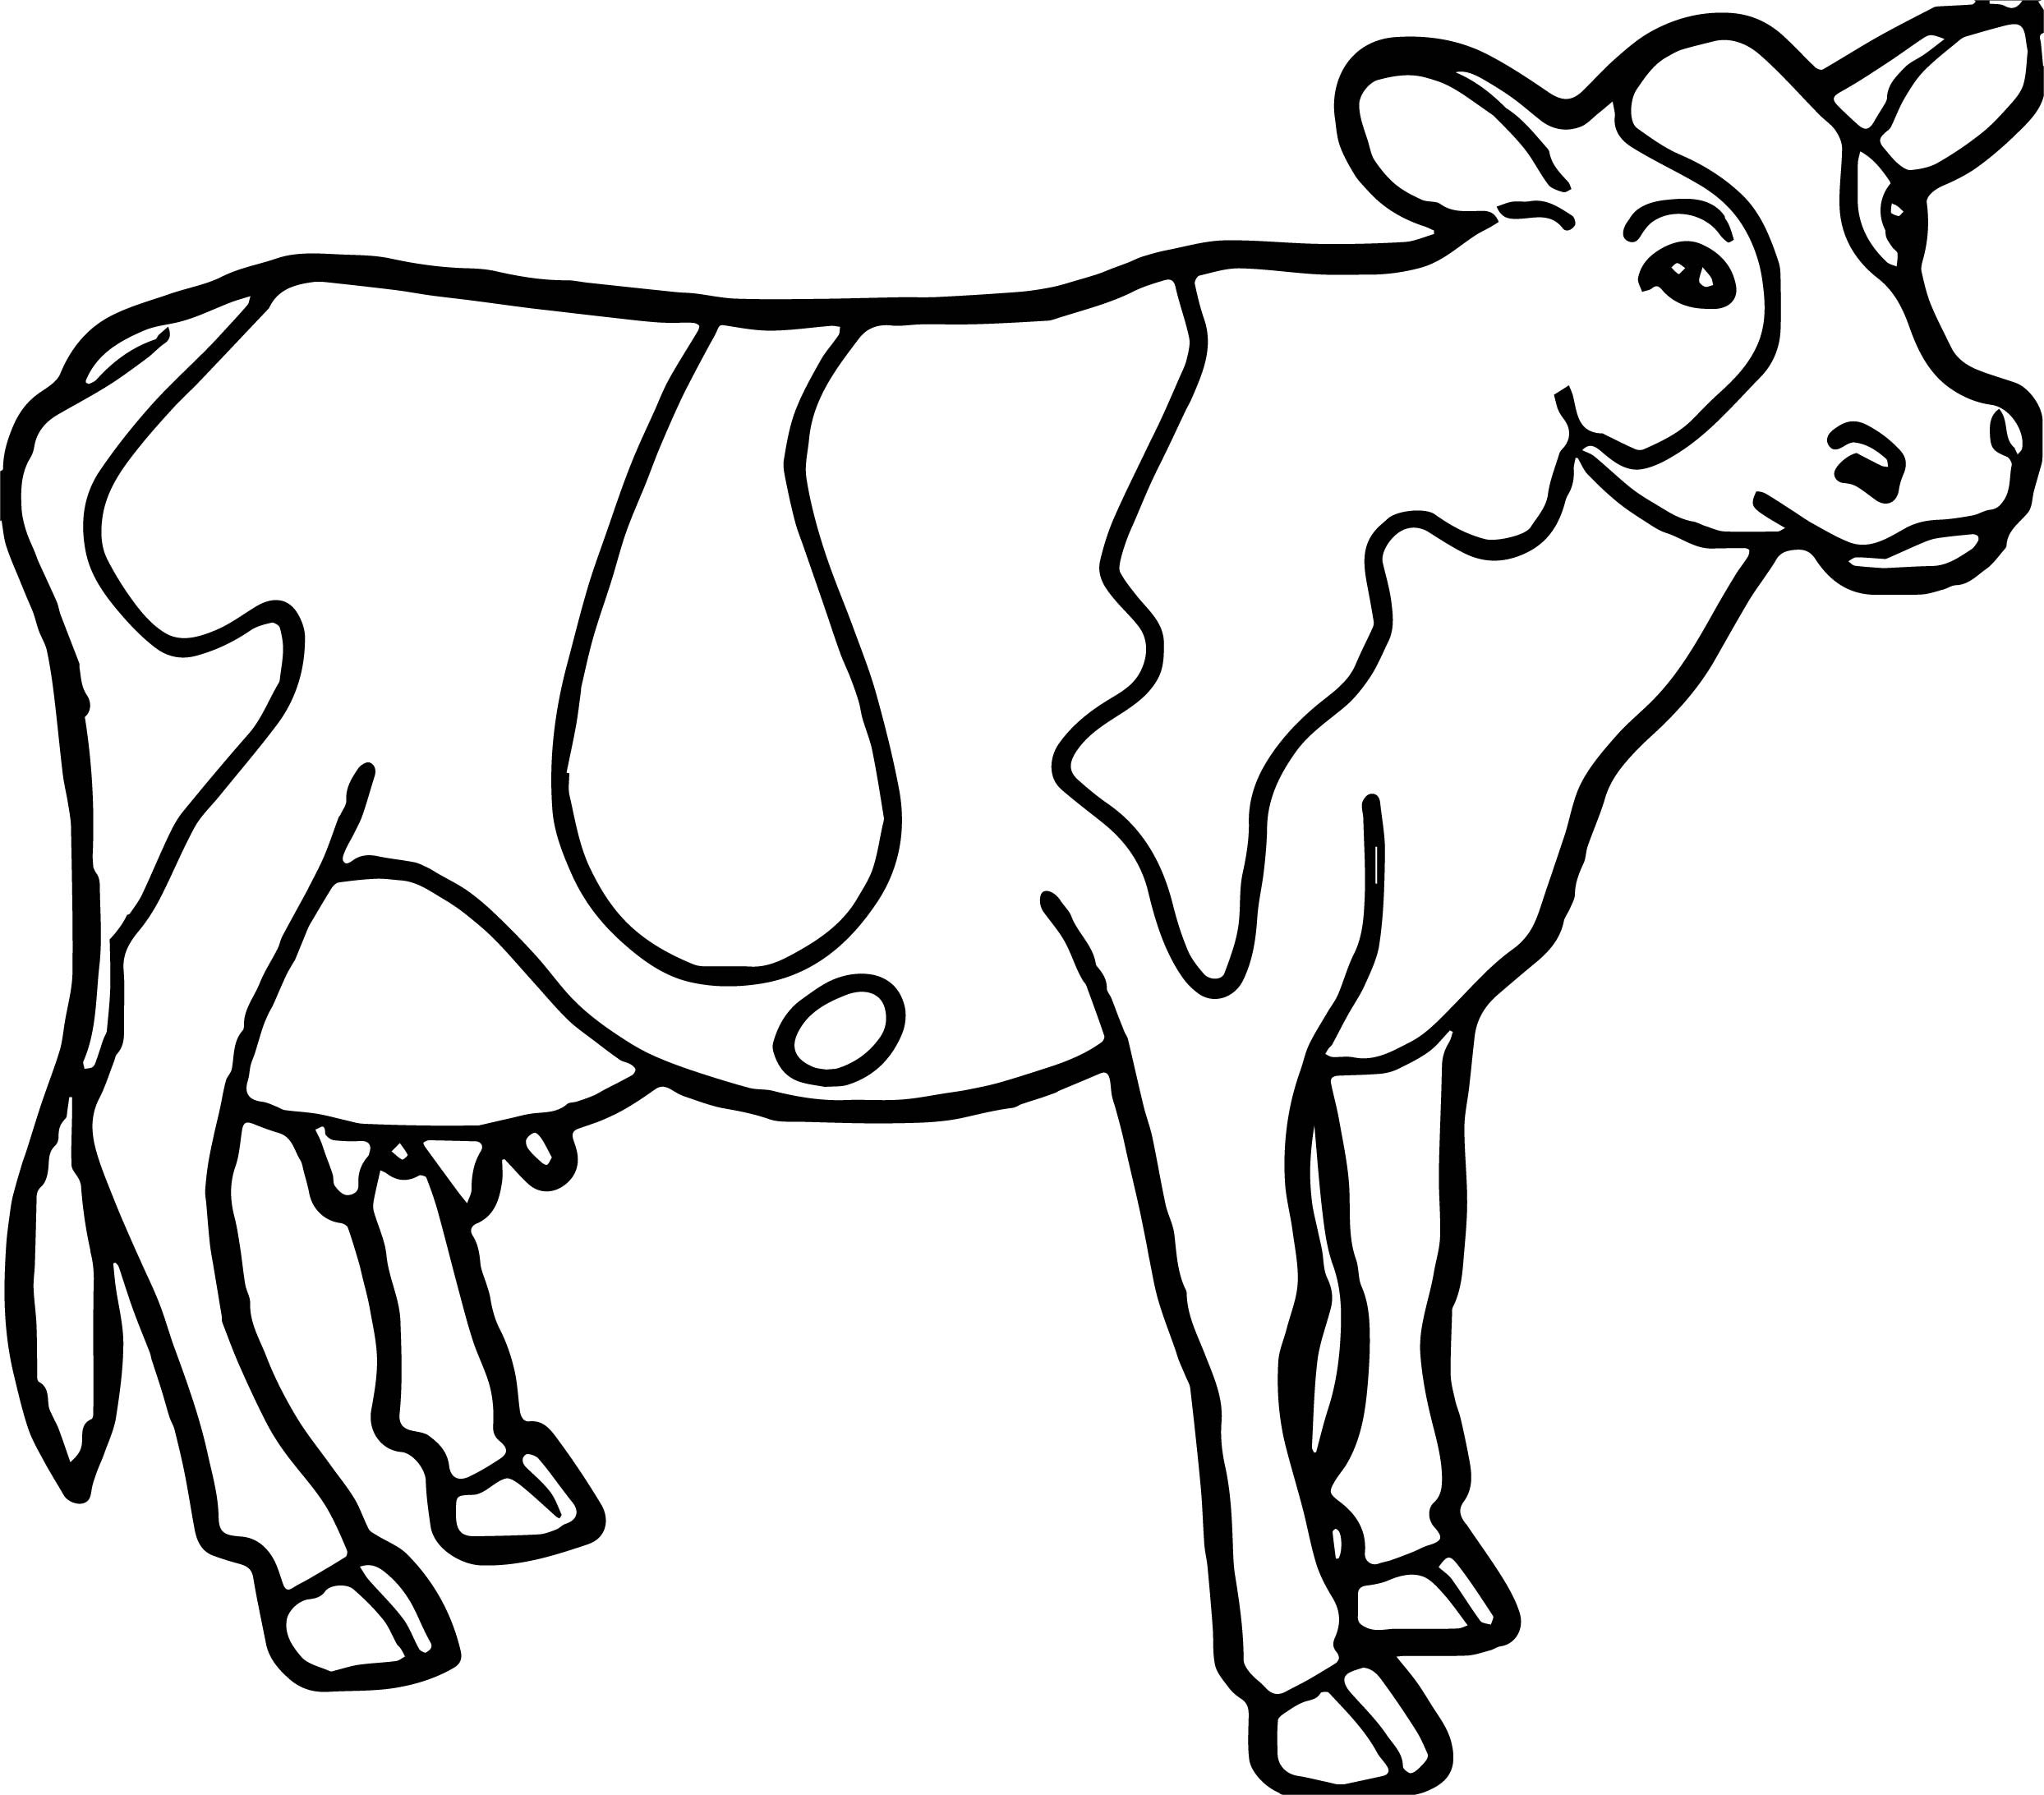 Cow Face Coloring Pages at Free printable colorings